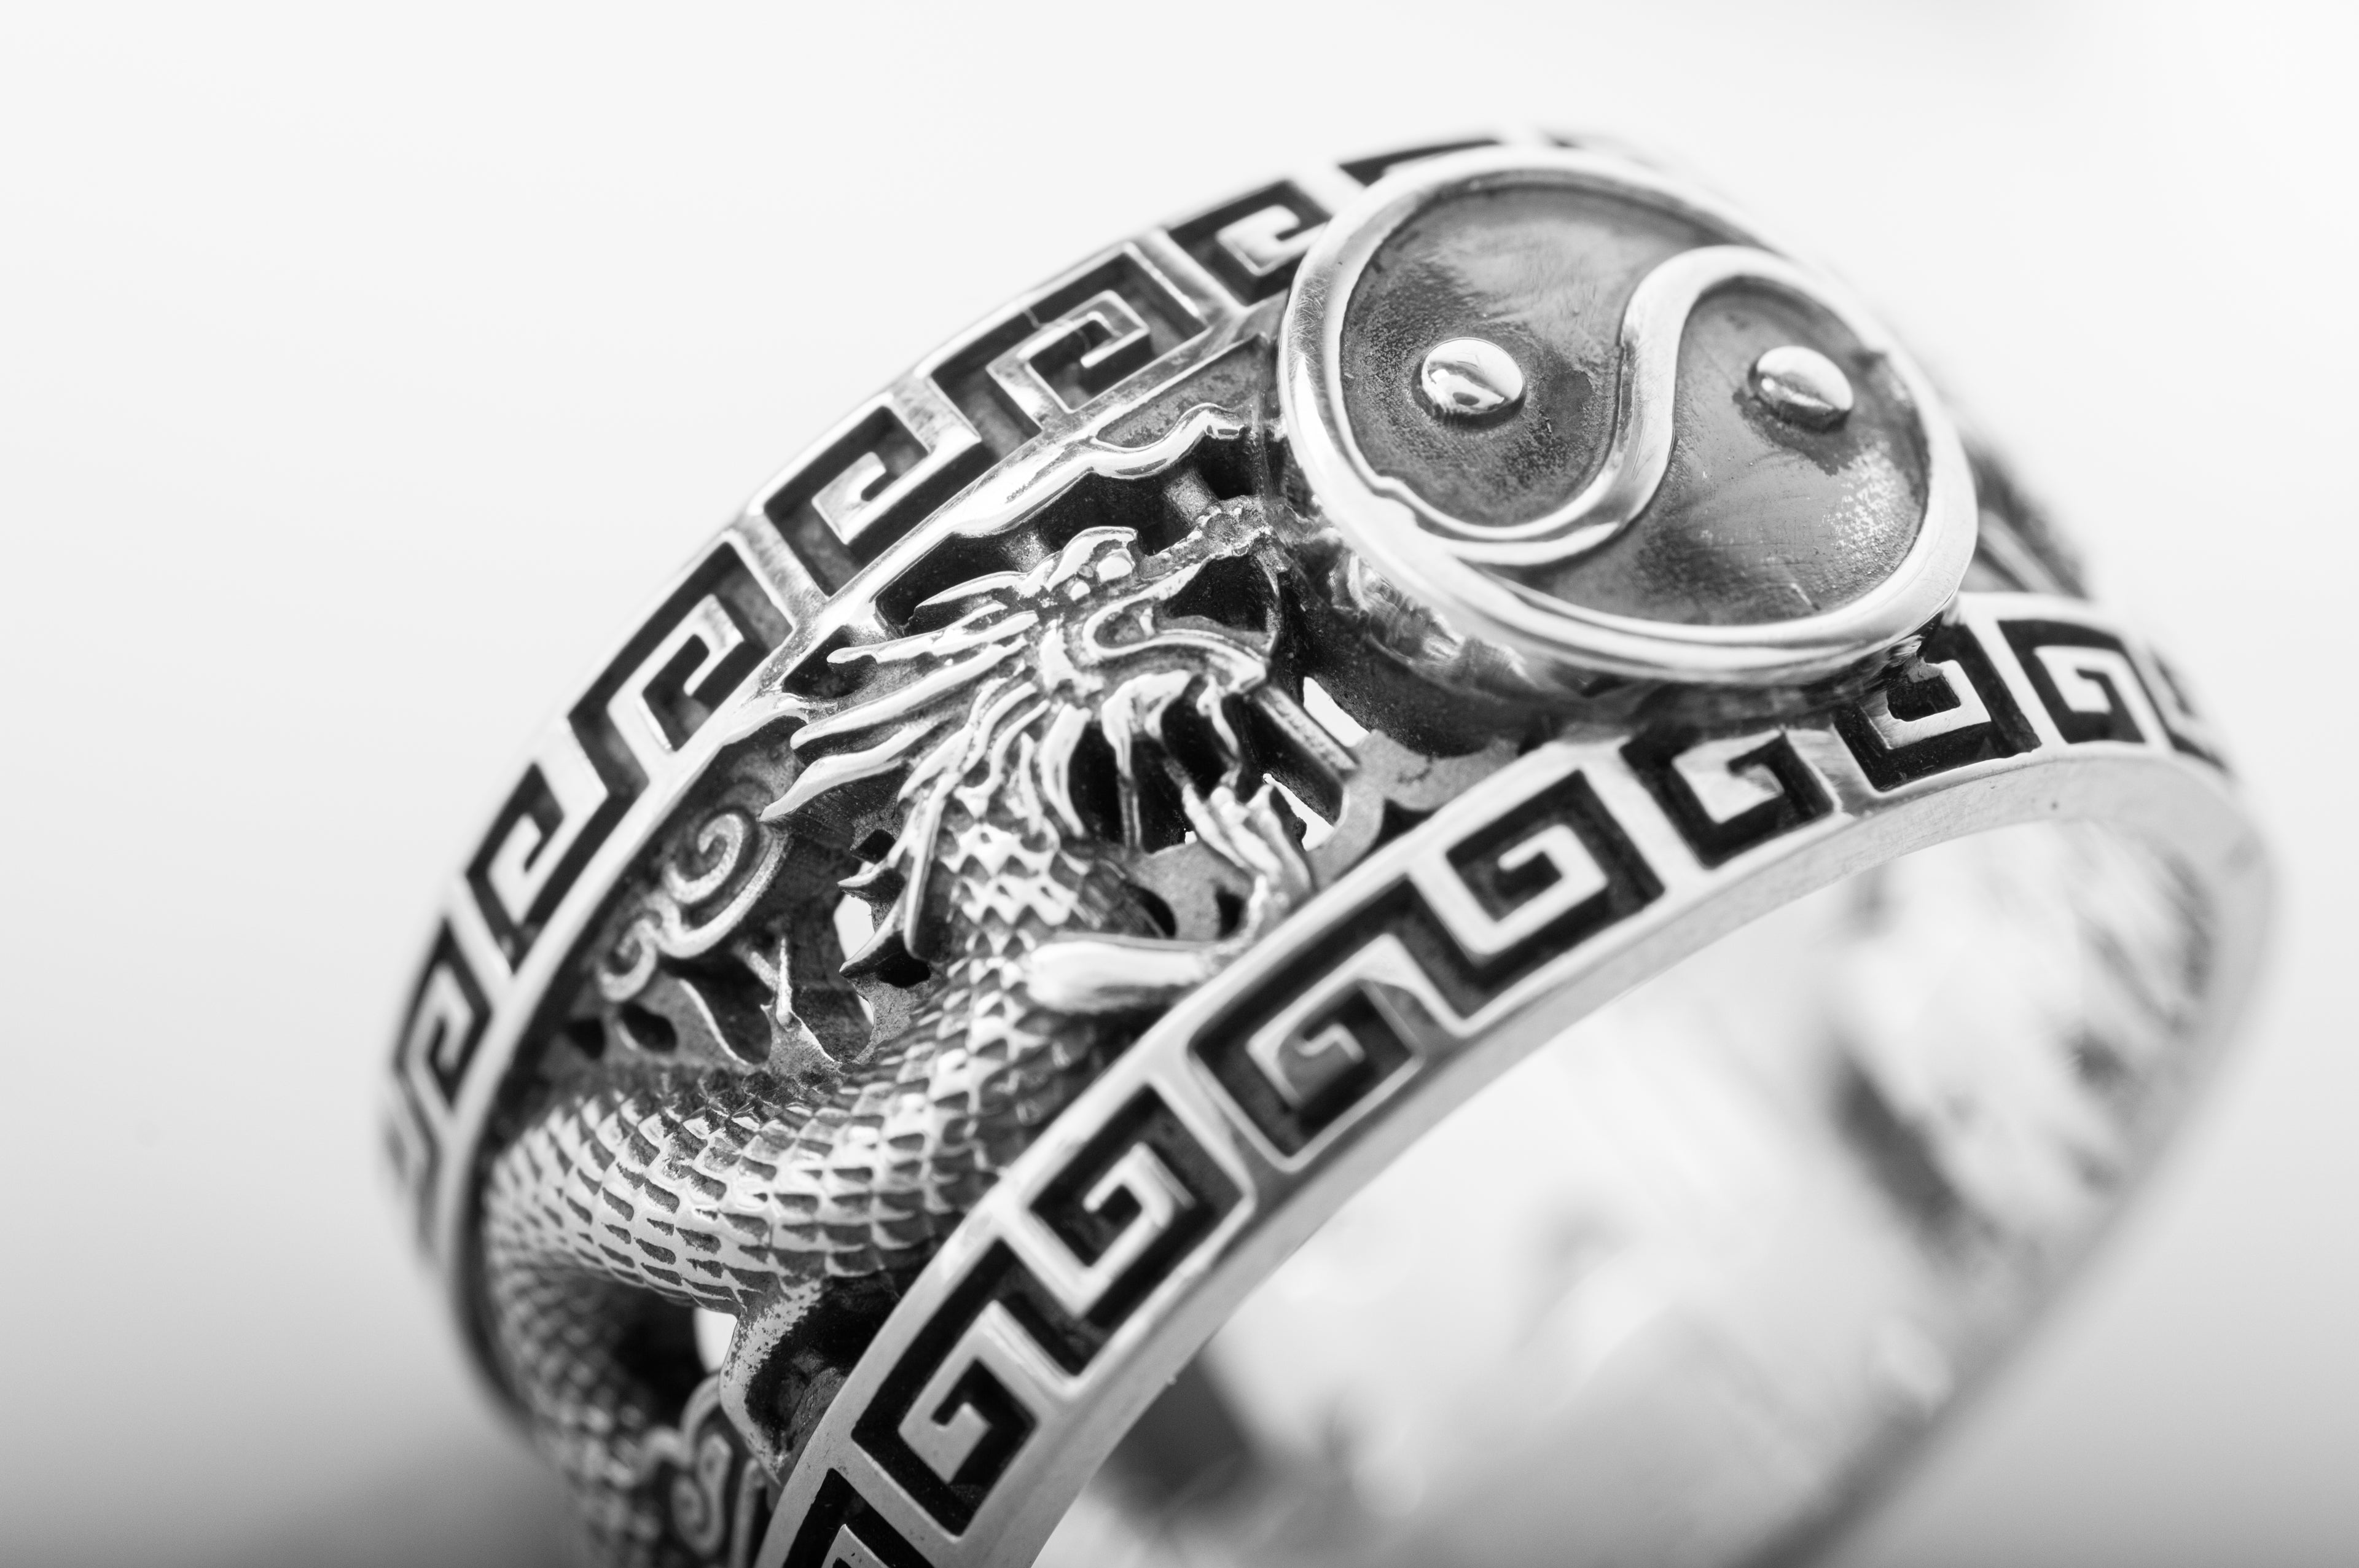 Ying-Yang Symbol Sterling Silver Ring with Dragons